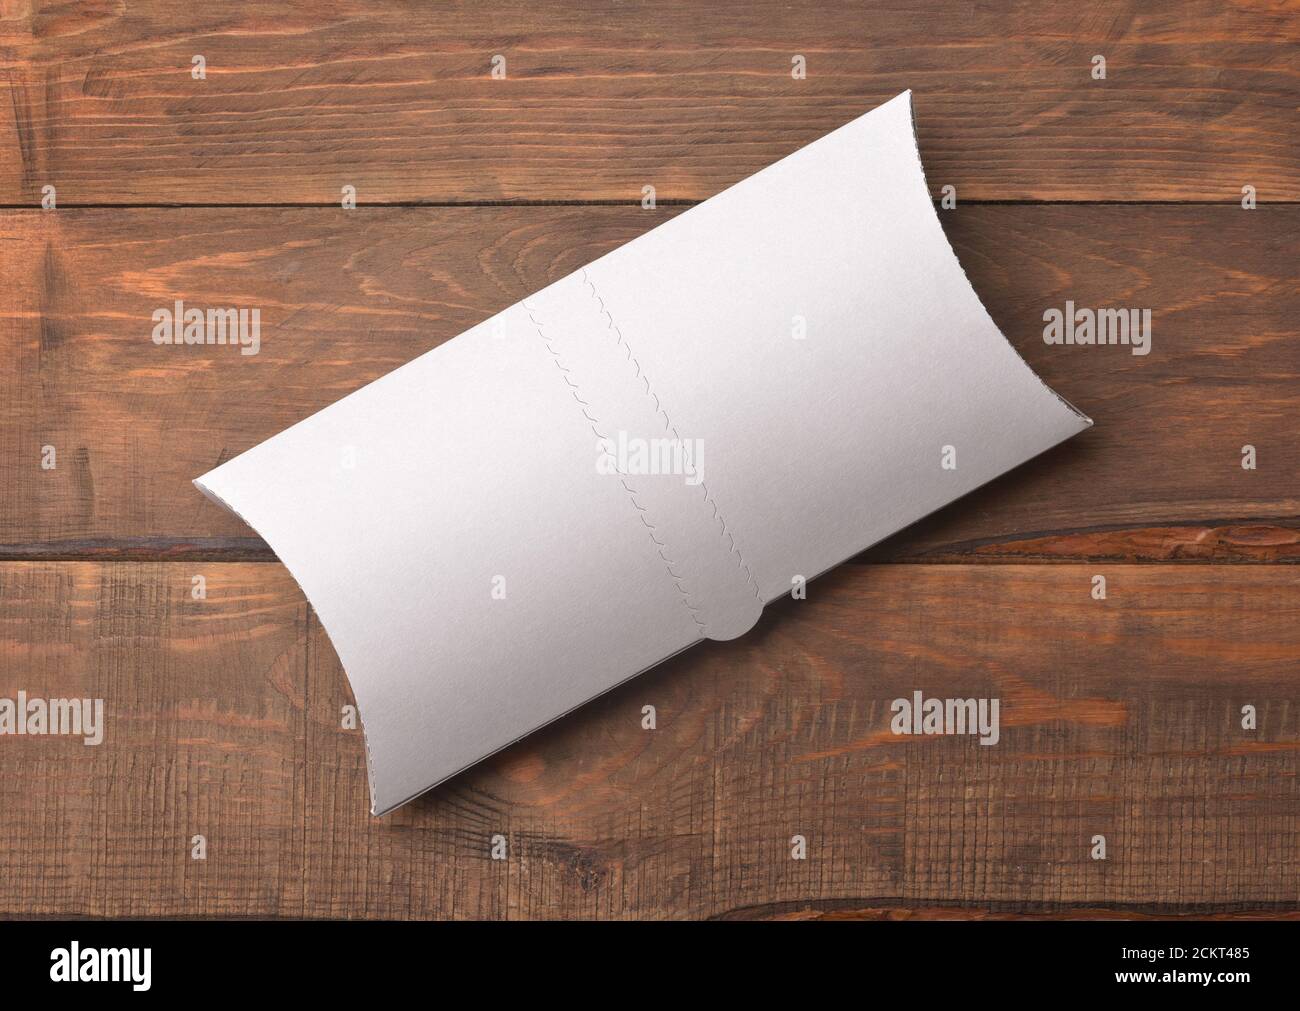 Download Top View Of White Blank Doner Kebab Paper Packaging On Wooden Background Stock Photo Alamy